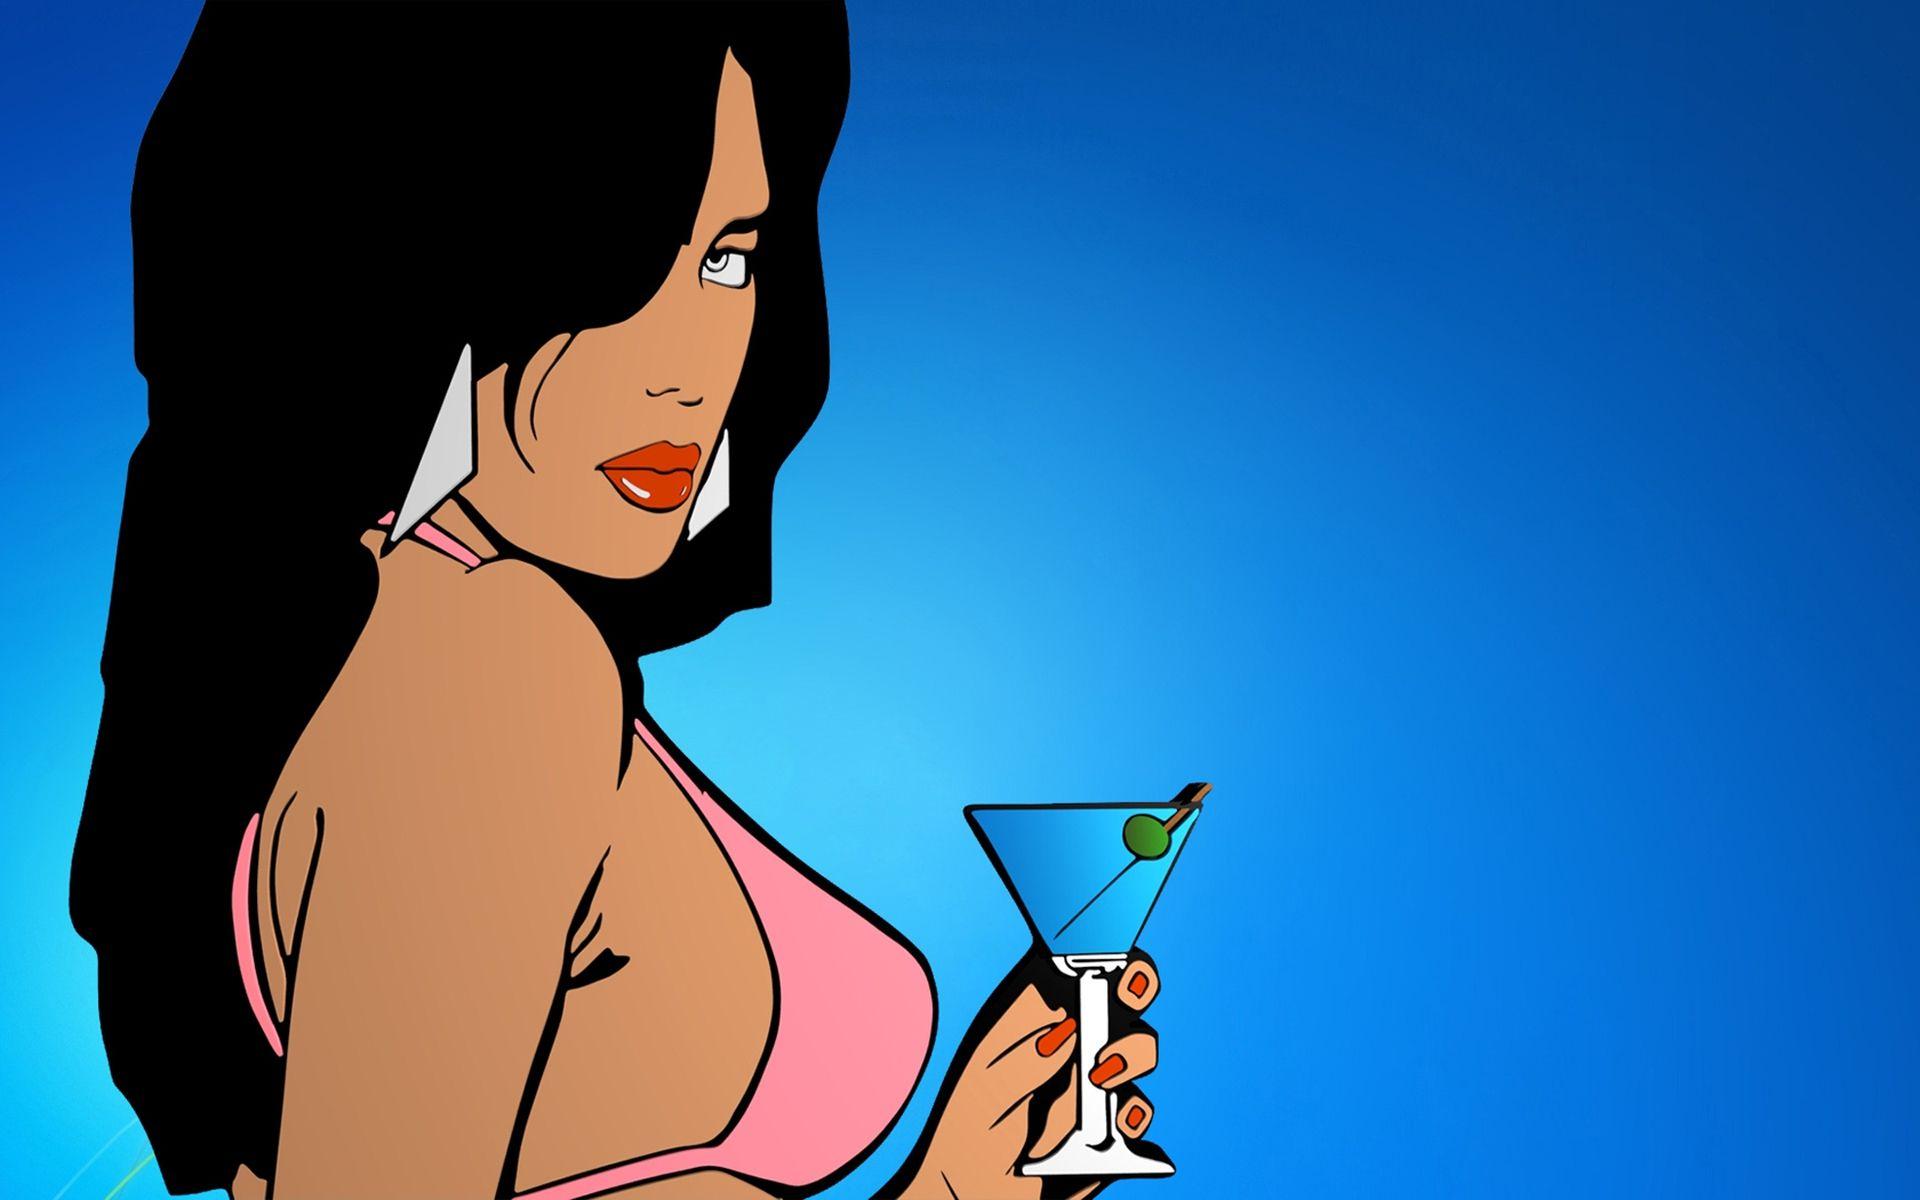 Grand Theft Auto Vice City Girl wallpapers